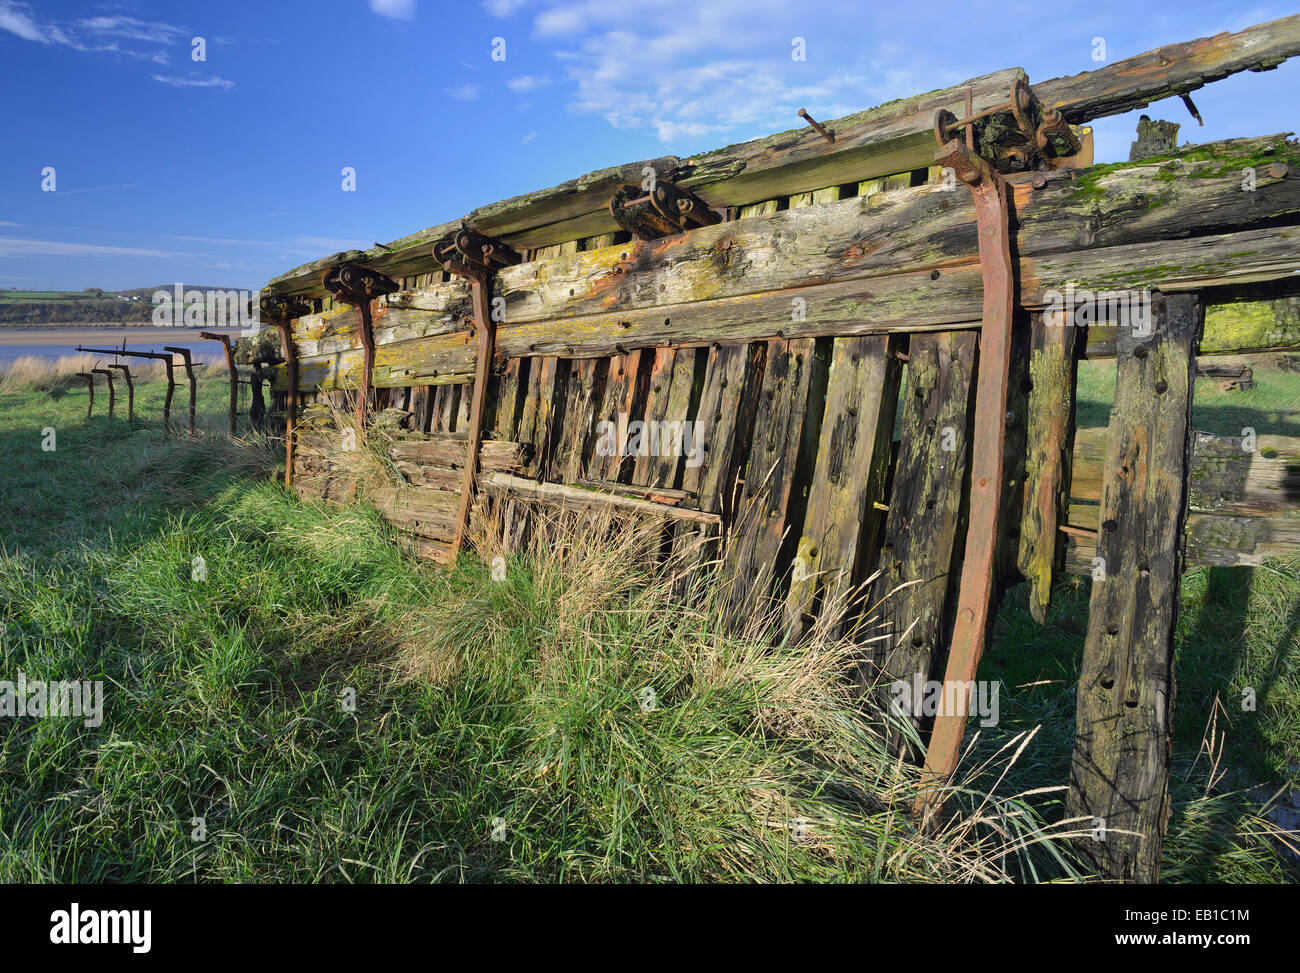 Remains of old wooden ship, Dispatch. Beached at Purton to help prevent the River Severn eroding into the Gloucester Sharpness C Stock Photo